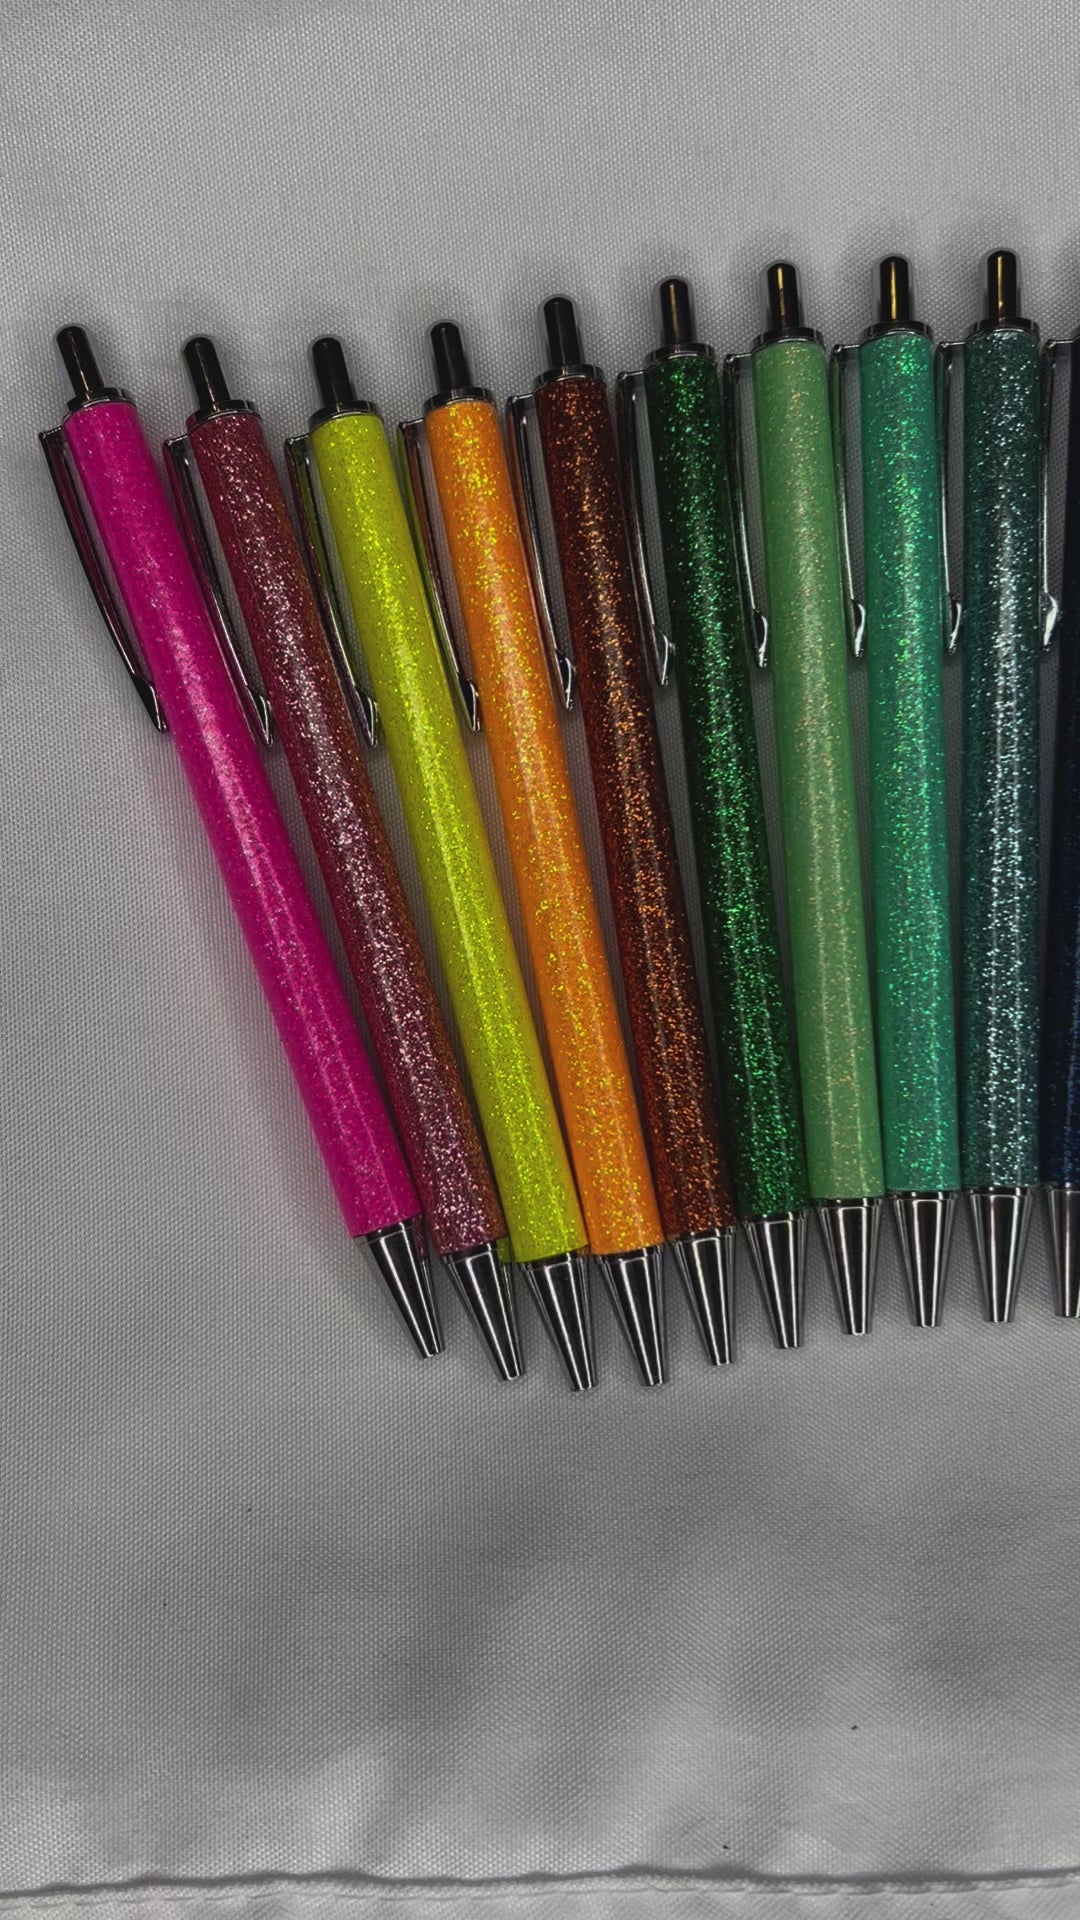 Video of the metal glitter body pens to show them in real life. 